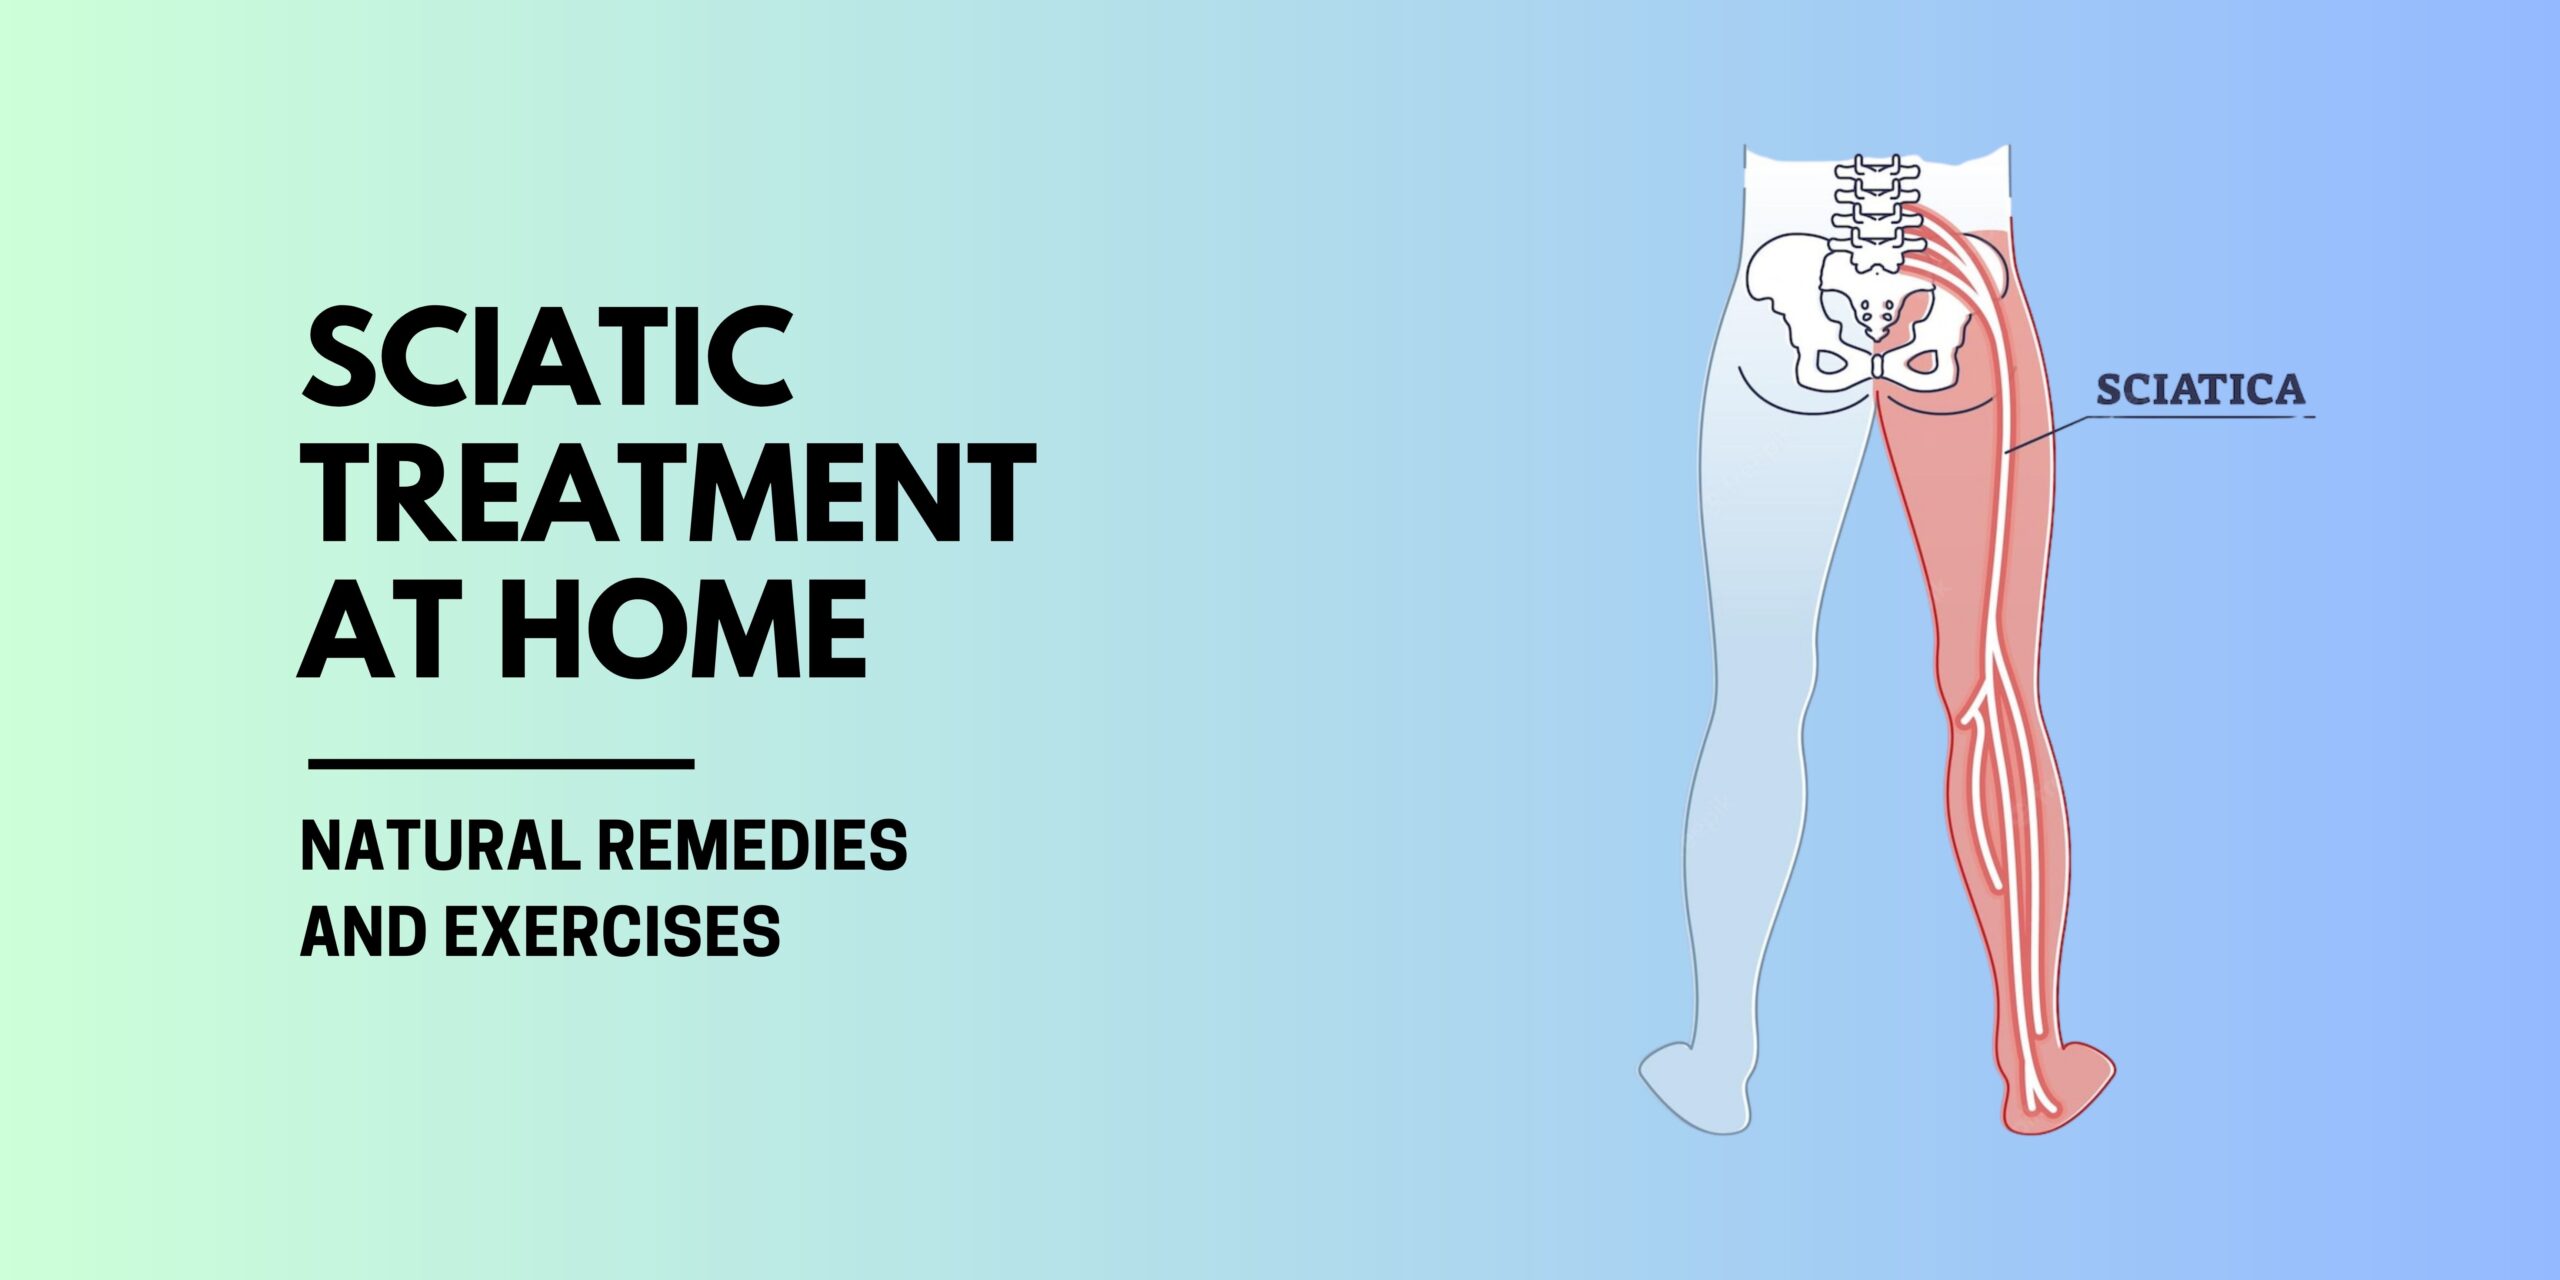 Sciatica Treatment at Home: Natural Remedies and Exercises